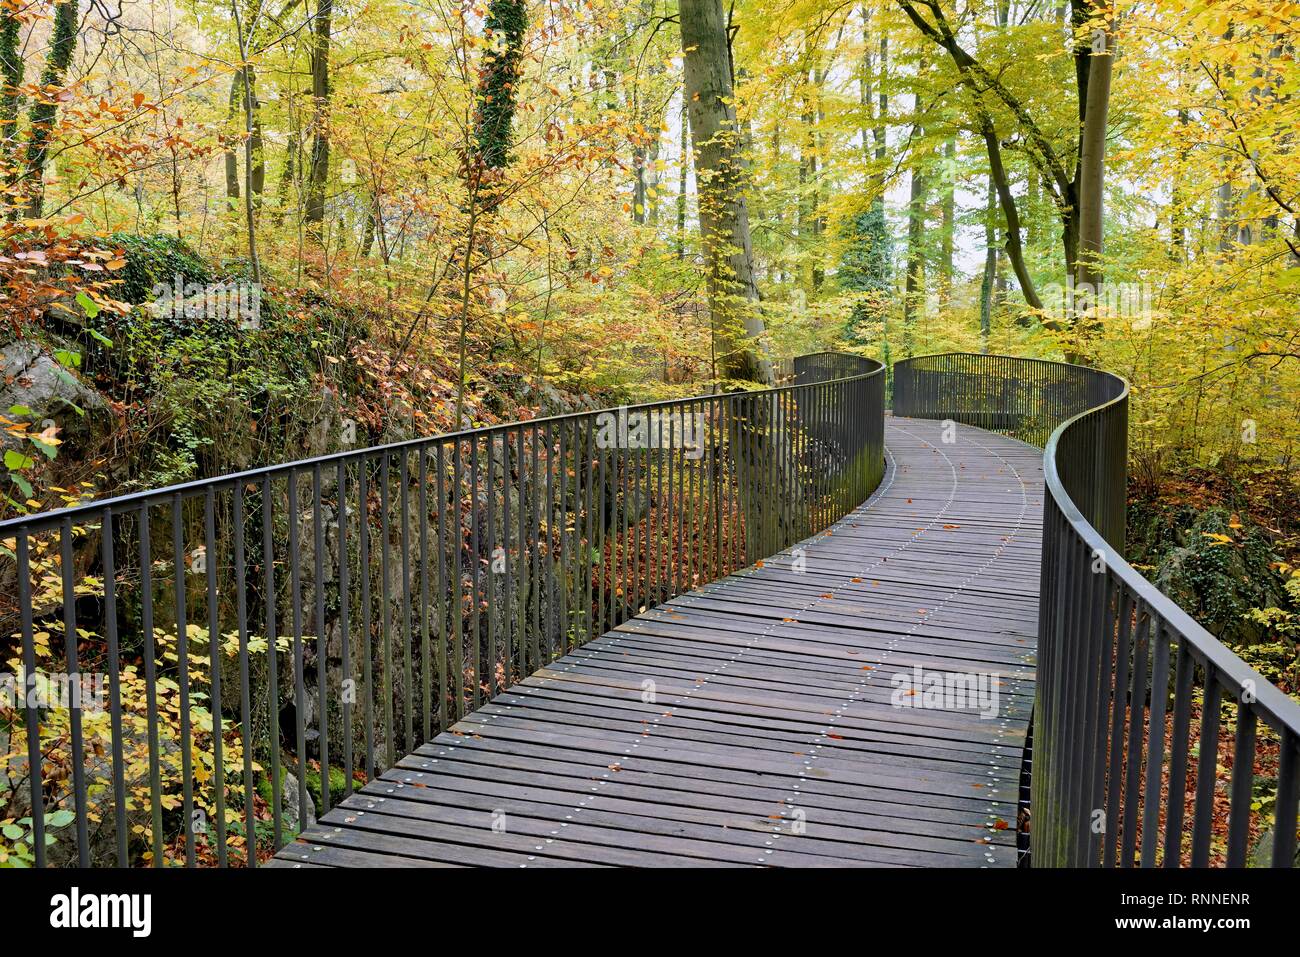 Curved pedestrian bridge in the Felsenmeer nature reserve, deciduous forest in autumn, Common beeches (Fagus sylvatica) Stock Photo